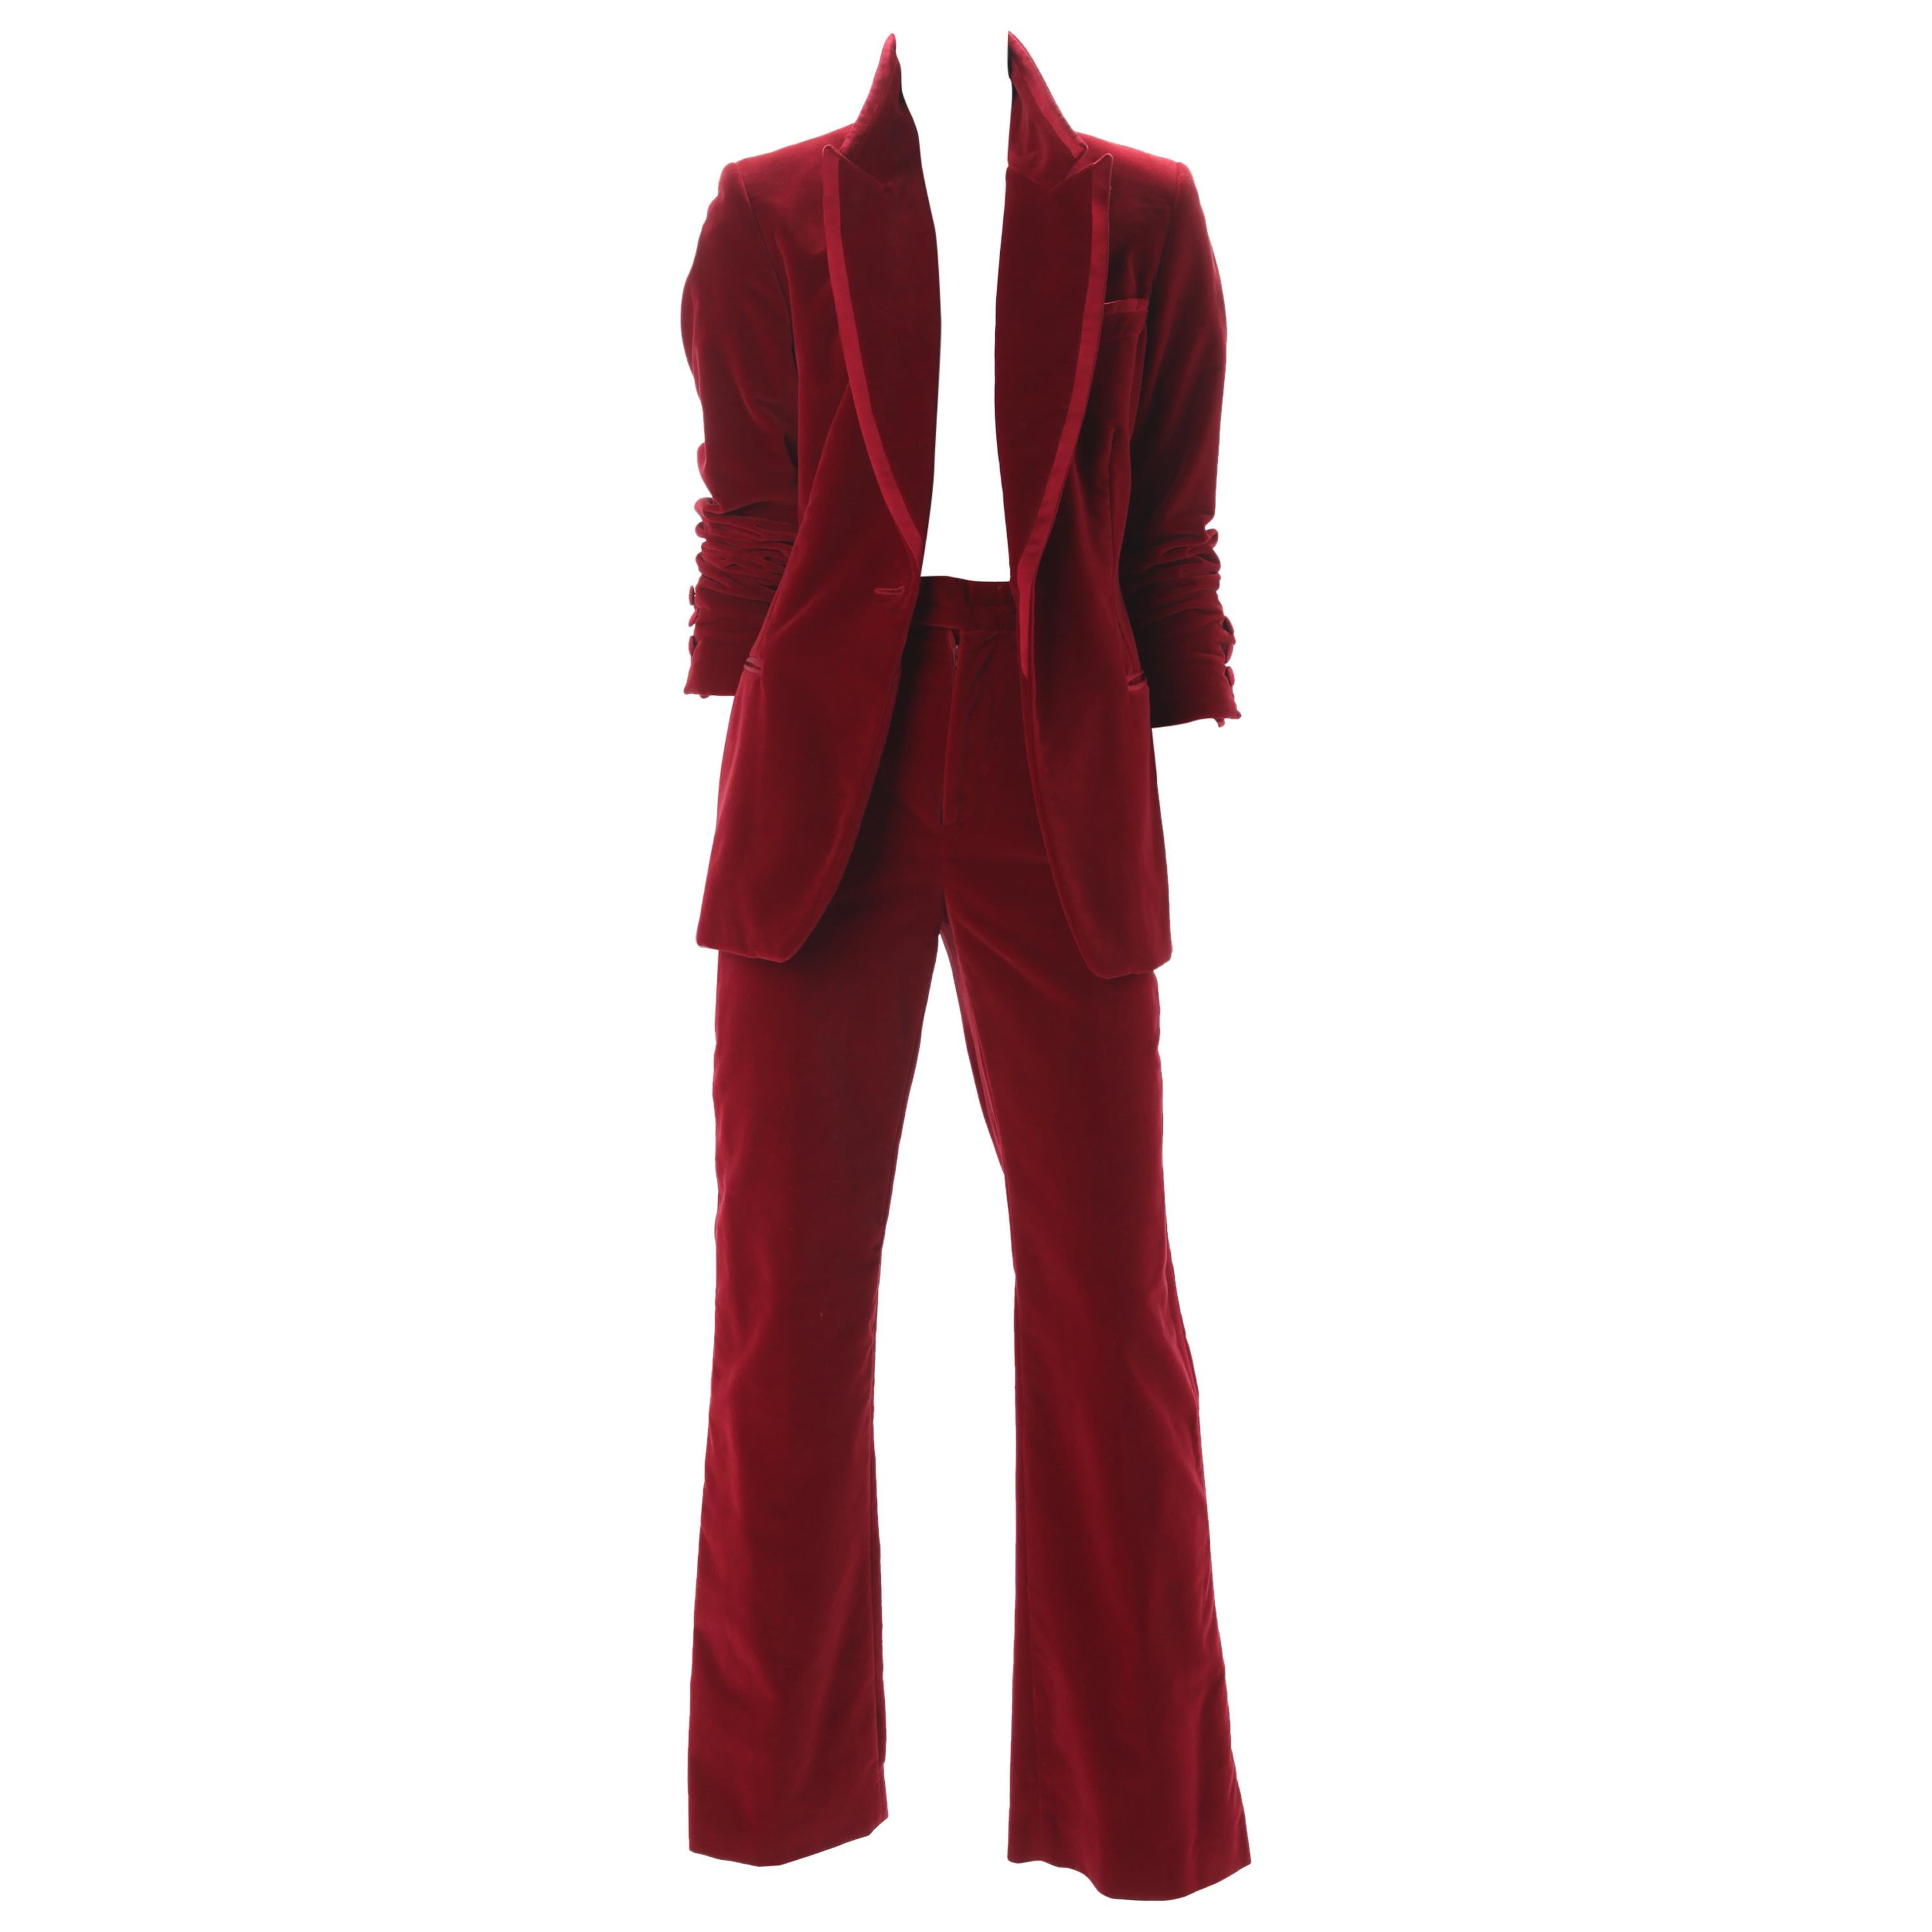 Introducir 35+ imagen tom ford gucci red velvet suit - Abzlocal.mx